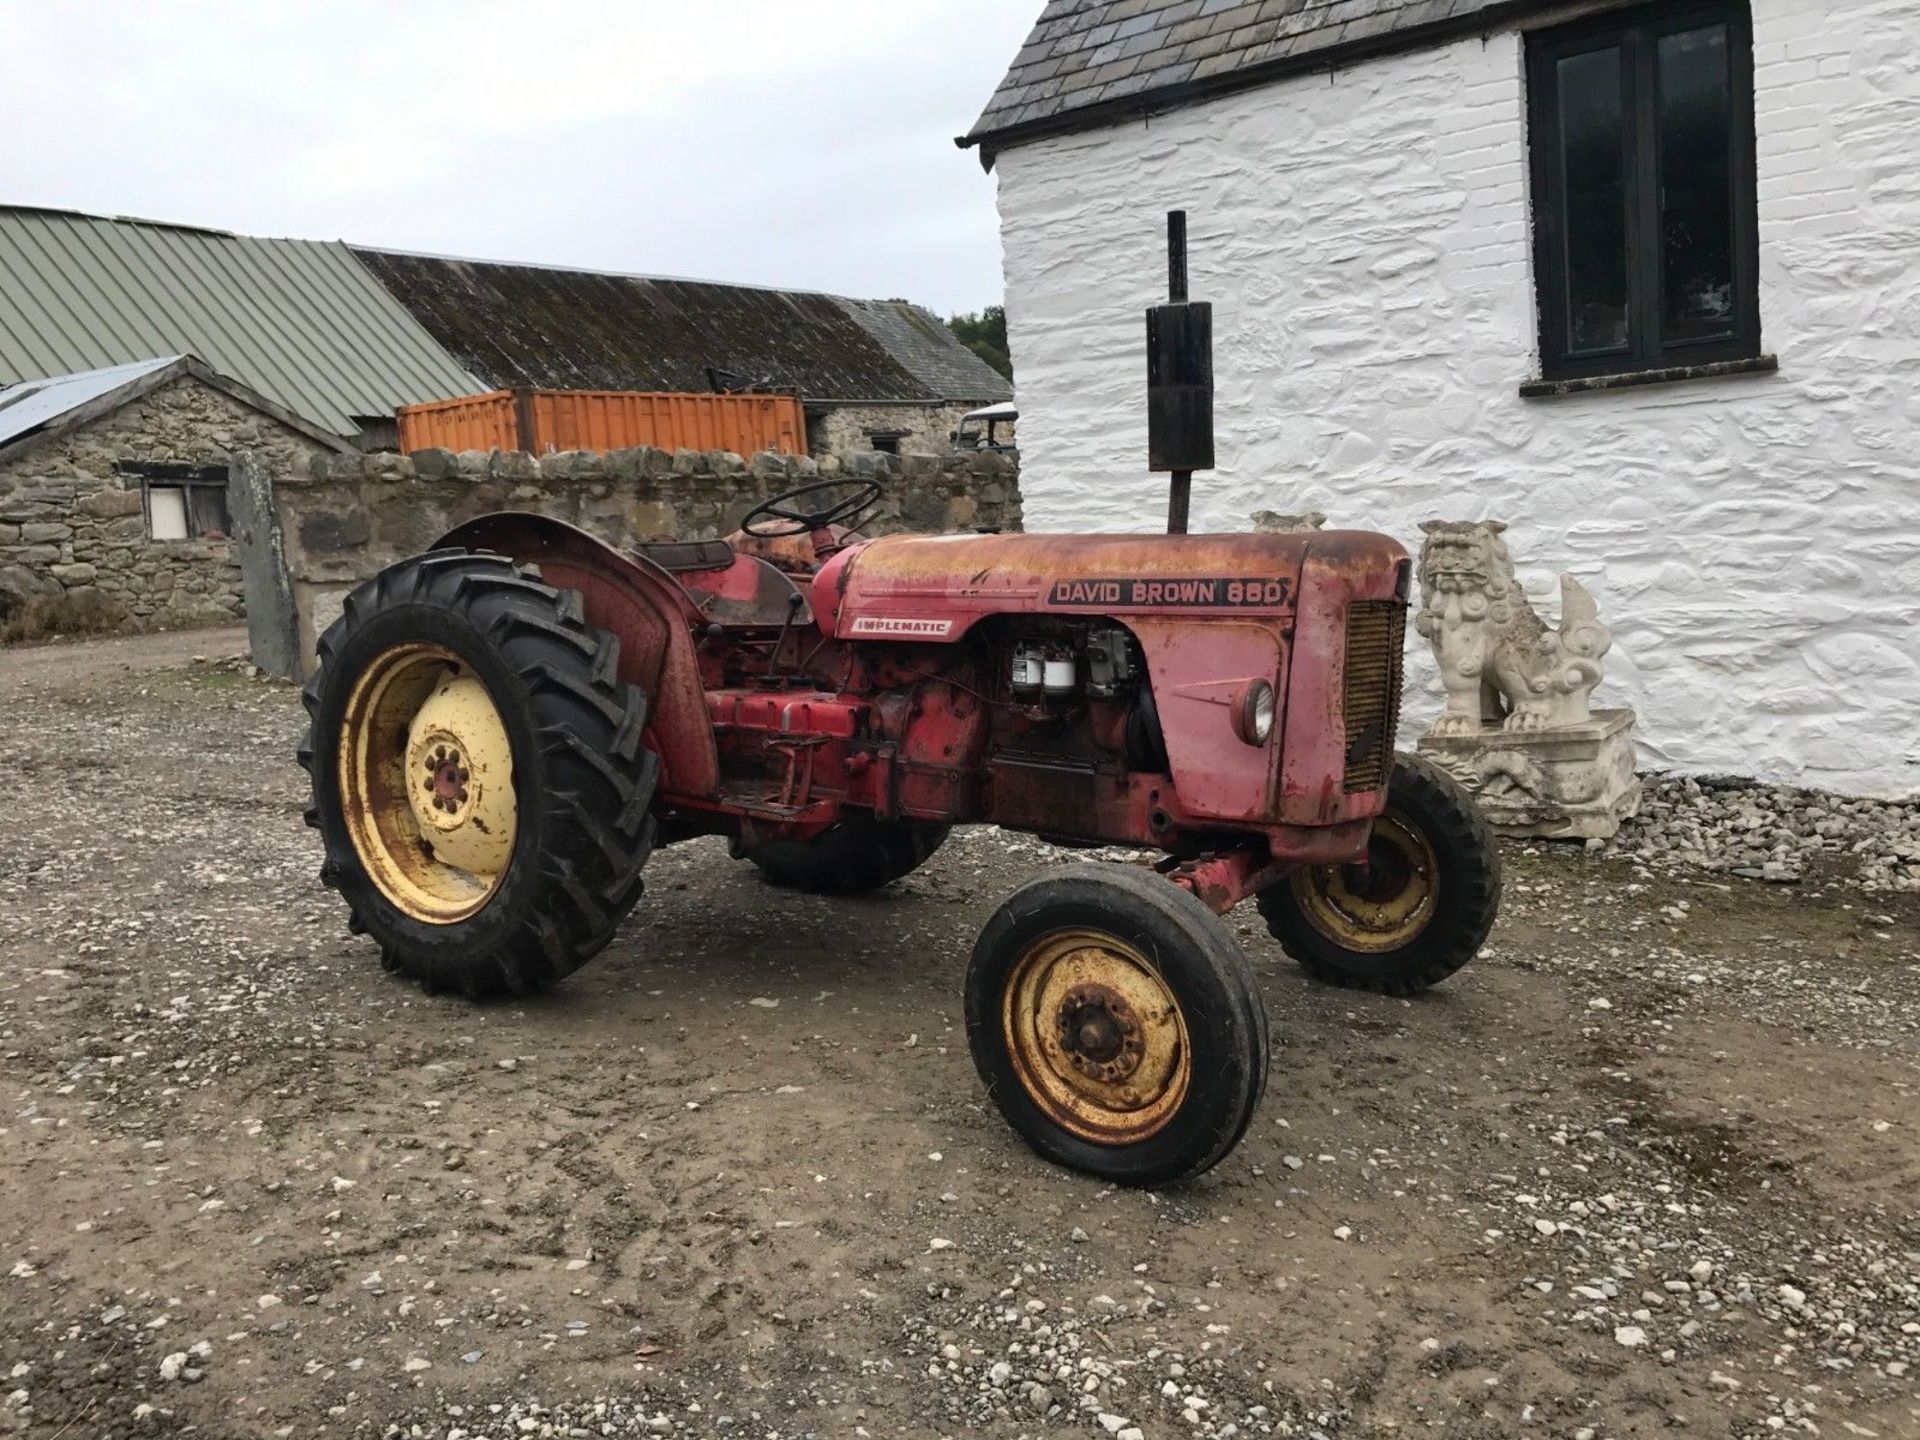 David Brown 880 Tractor 2wd 3 Cylinder - Image 2 of 9